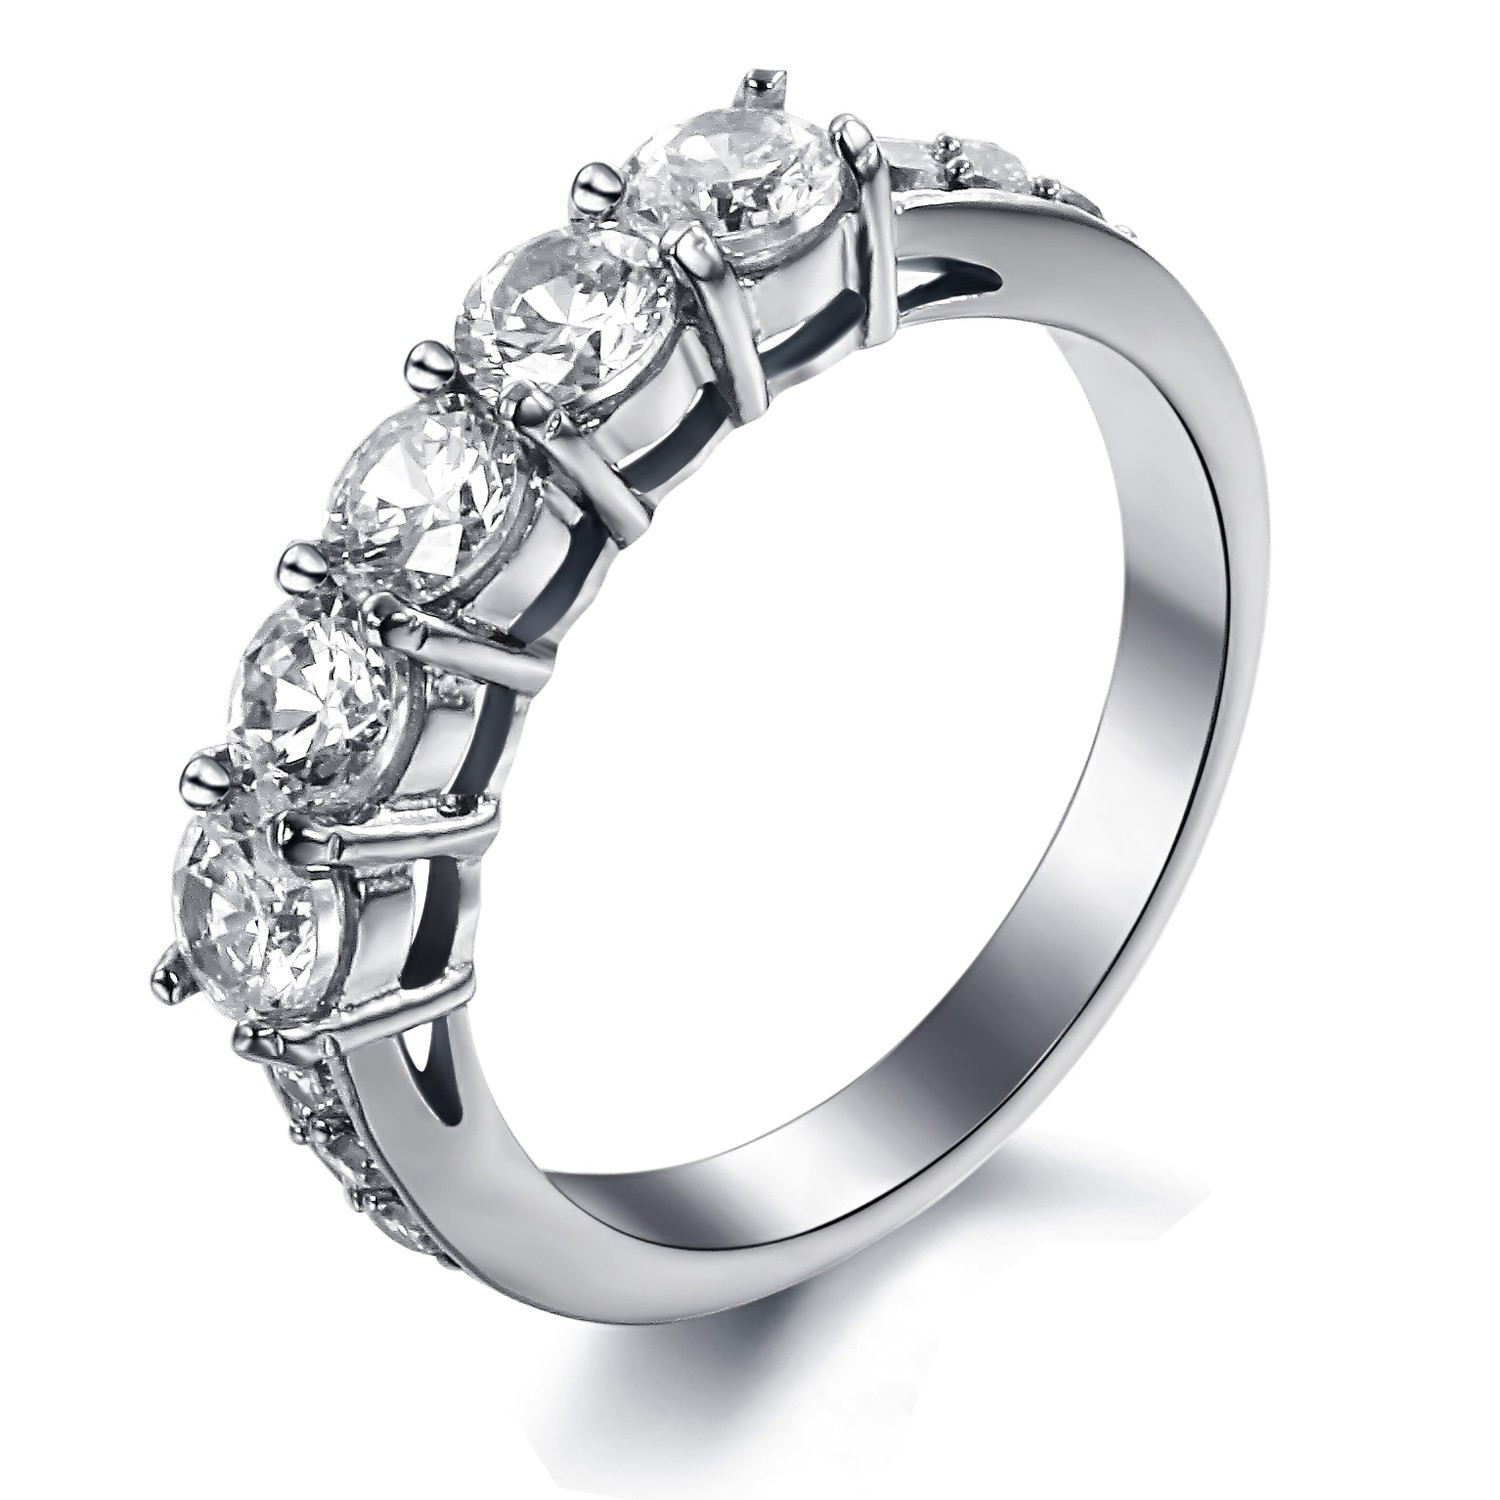 Cz Wedding Rings That Look Real
 Cubic zirconia white gold Imitation diamond engagement